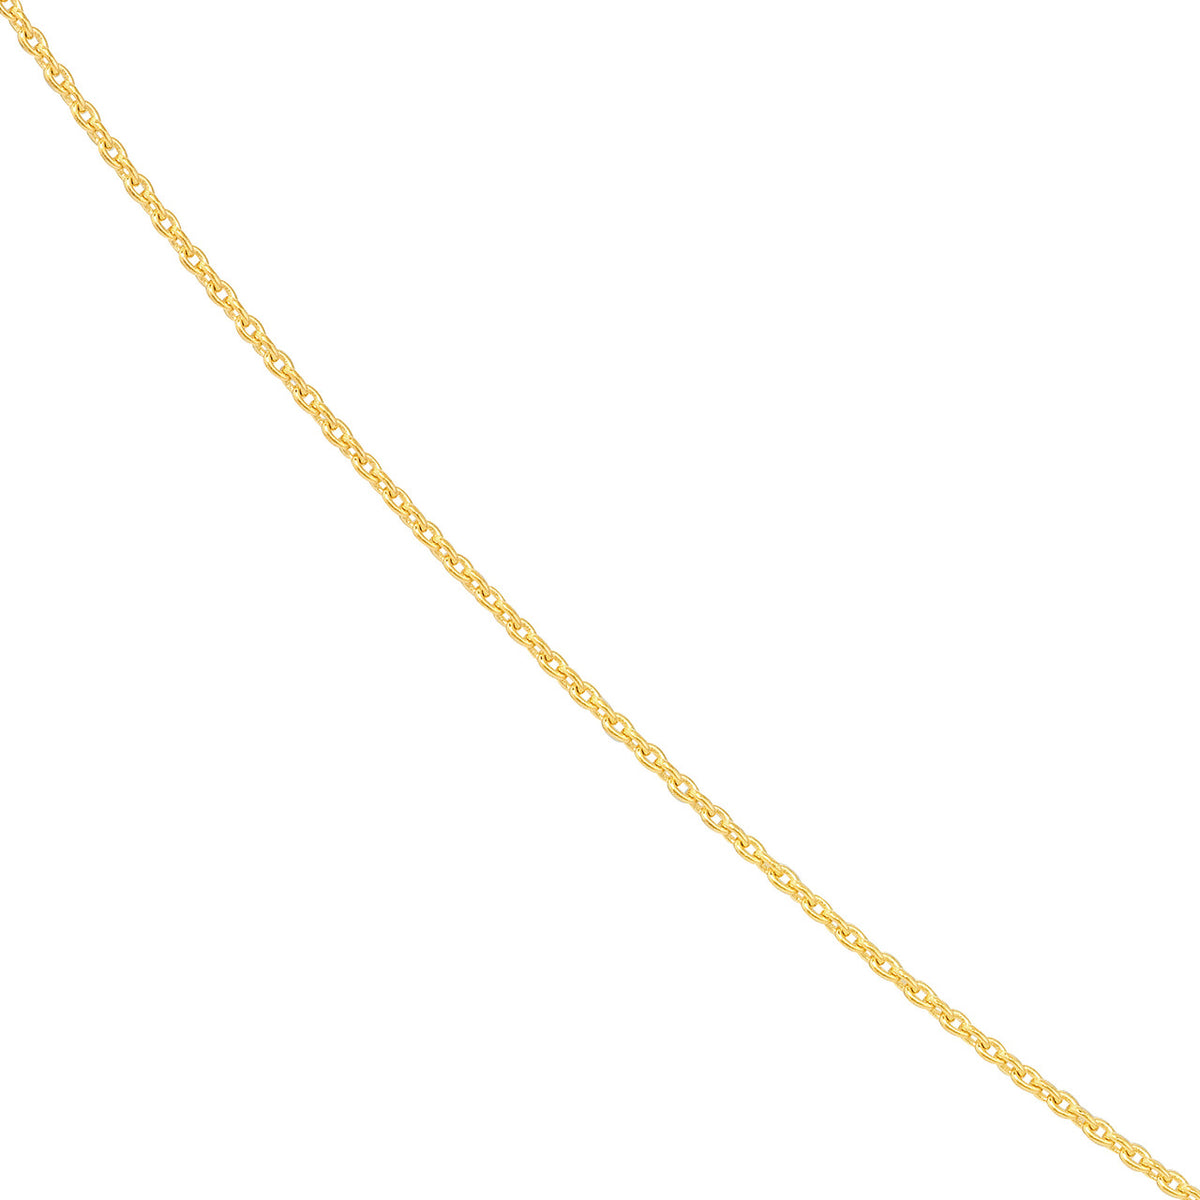 14K Yellow Gold and White Gold 0.7mm Adjustable Child's Cable Chain  Necklace